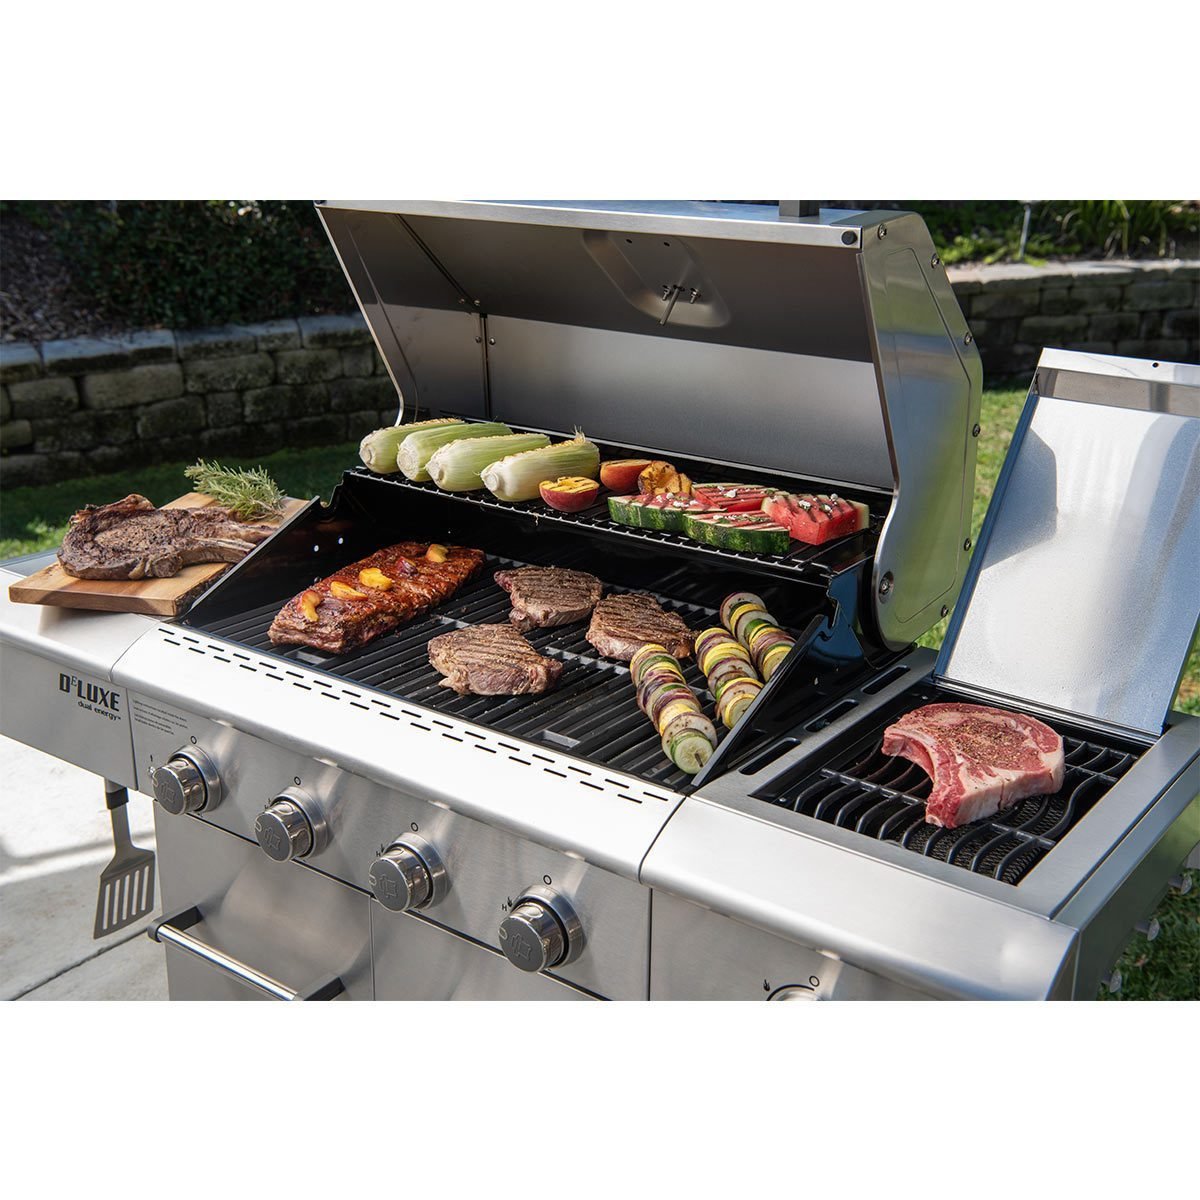 Nexgrill Deluxe 4 Burner Stainless Steel Gas Barbecue + Side Burner + Cover - Signature Retail Stores